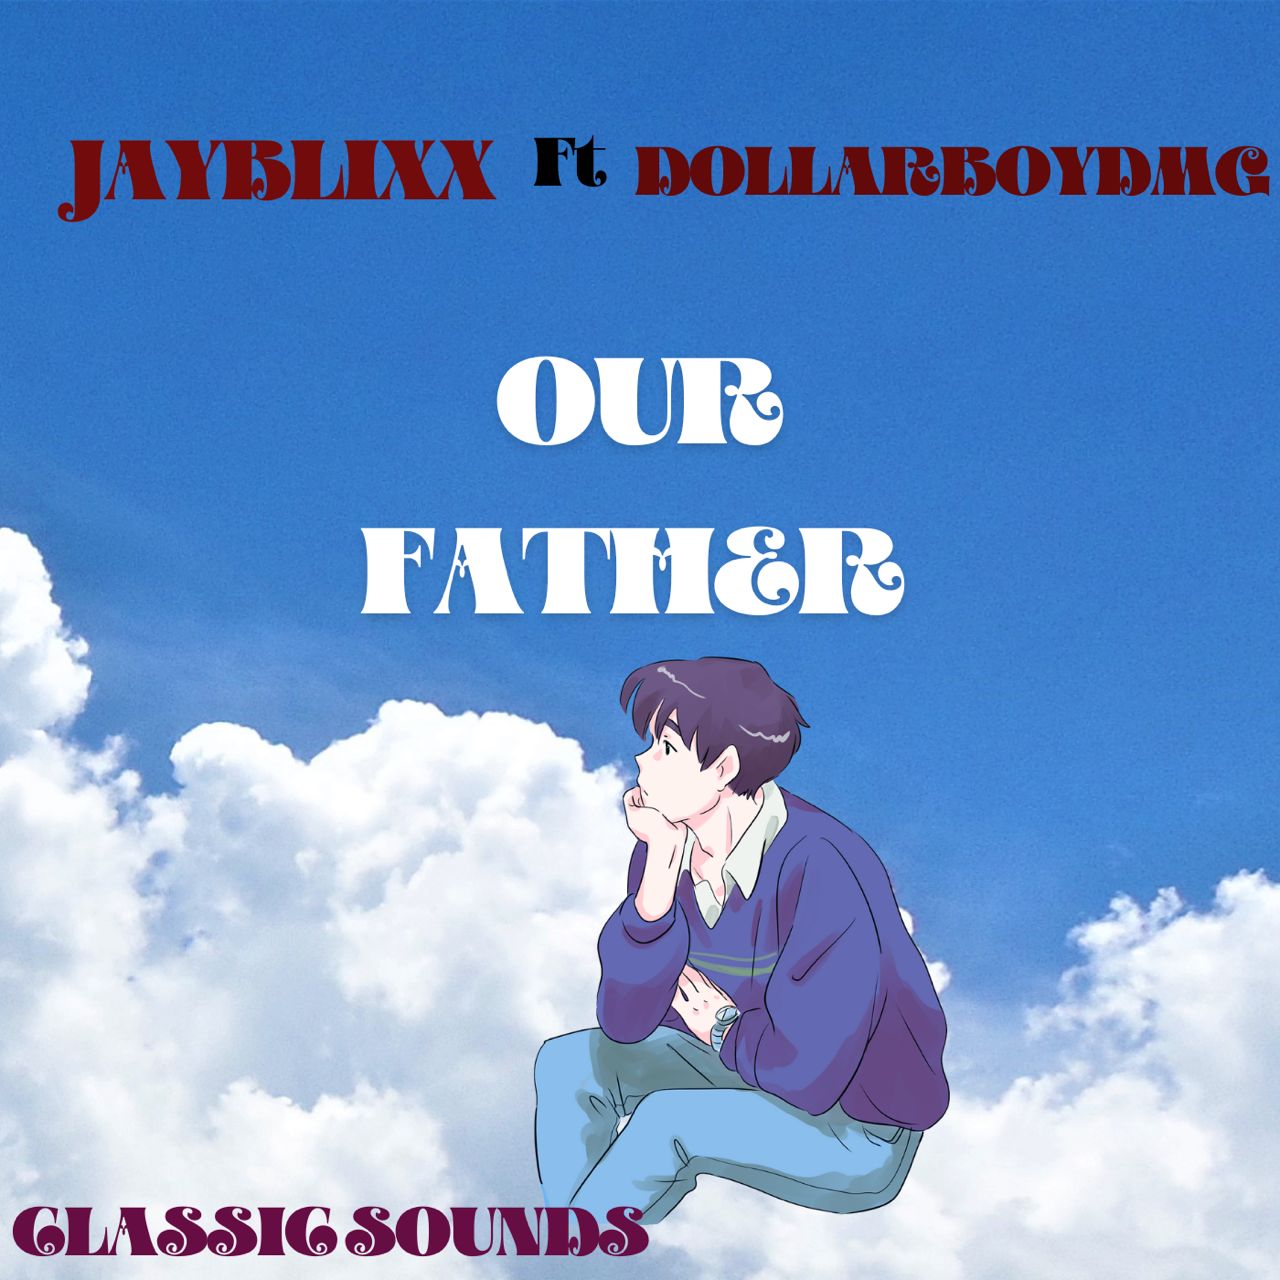 Jayblixx ft Dollarboydmg - Our Father Mp3 Download